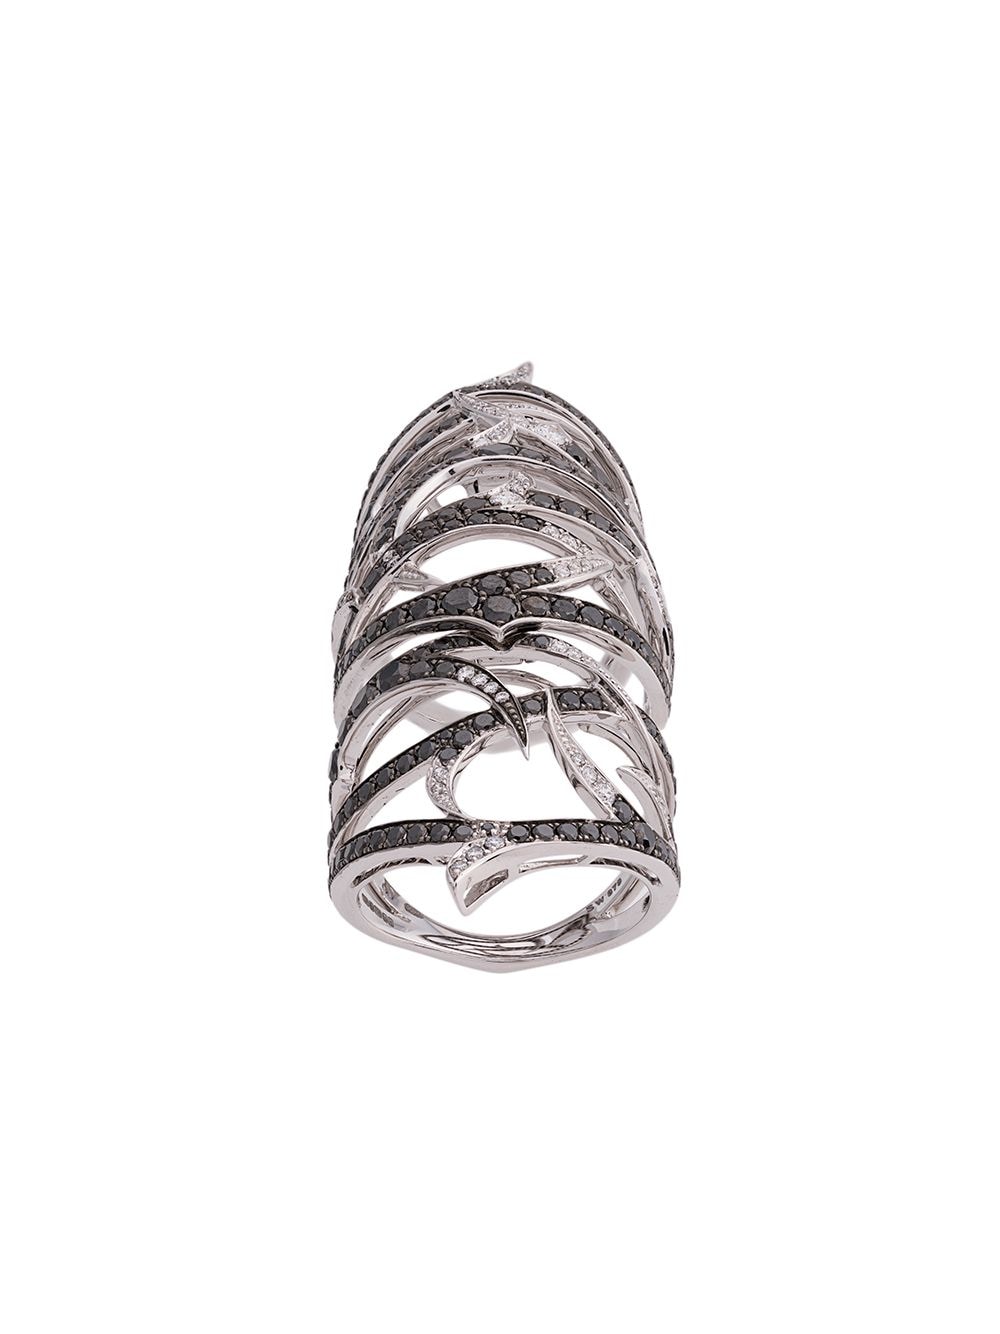 Stephen Webster Embellished Armour Ring In White Gold